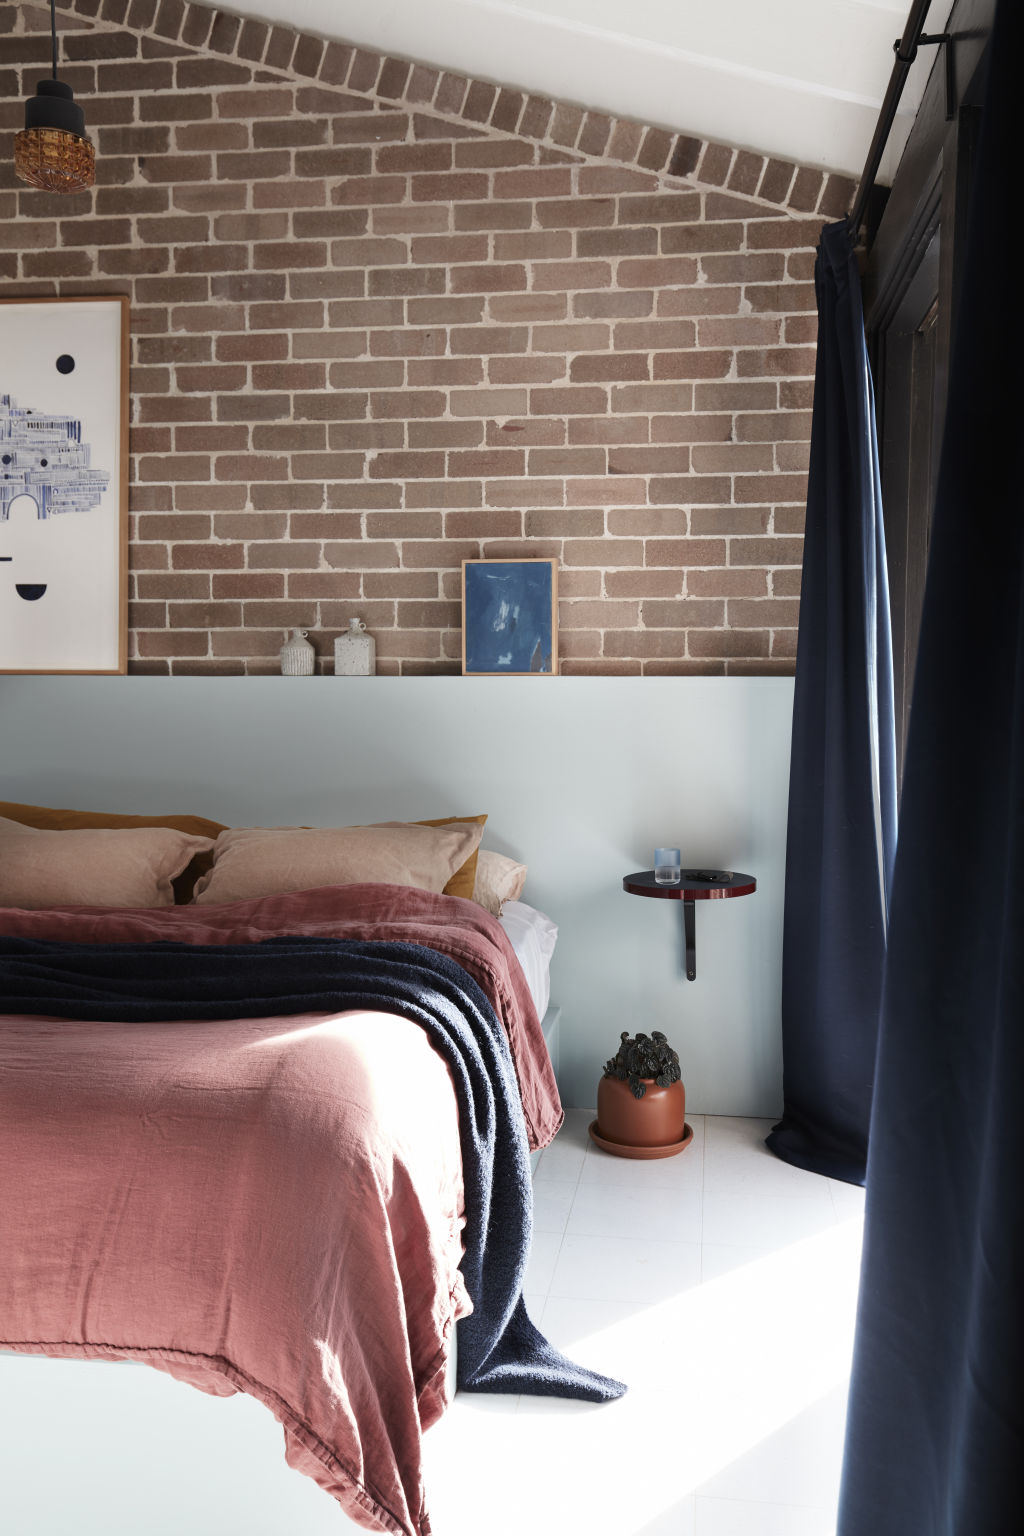 Exposed brick adds a raw textural element in this bedroom. Photo: Prue Ruscoe